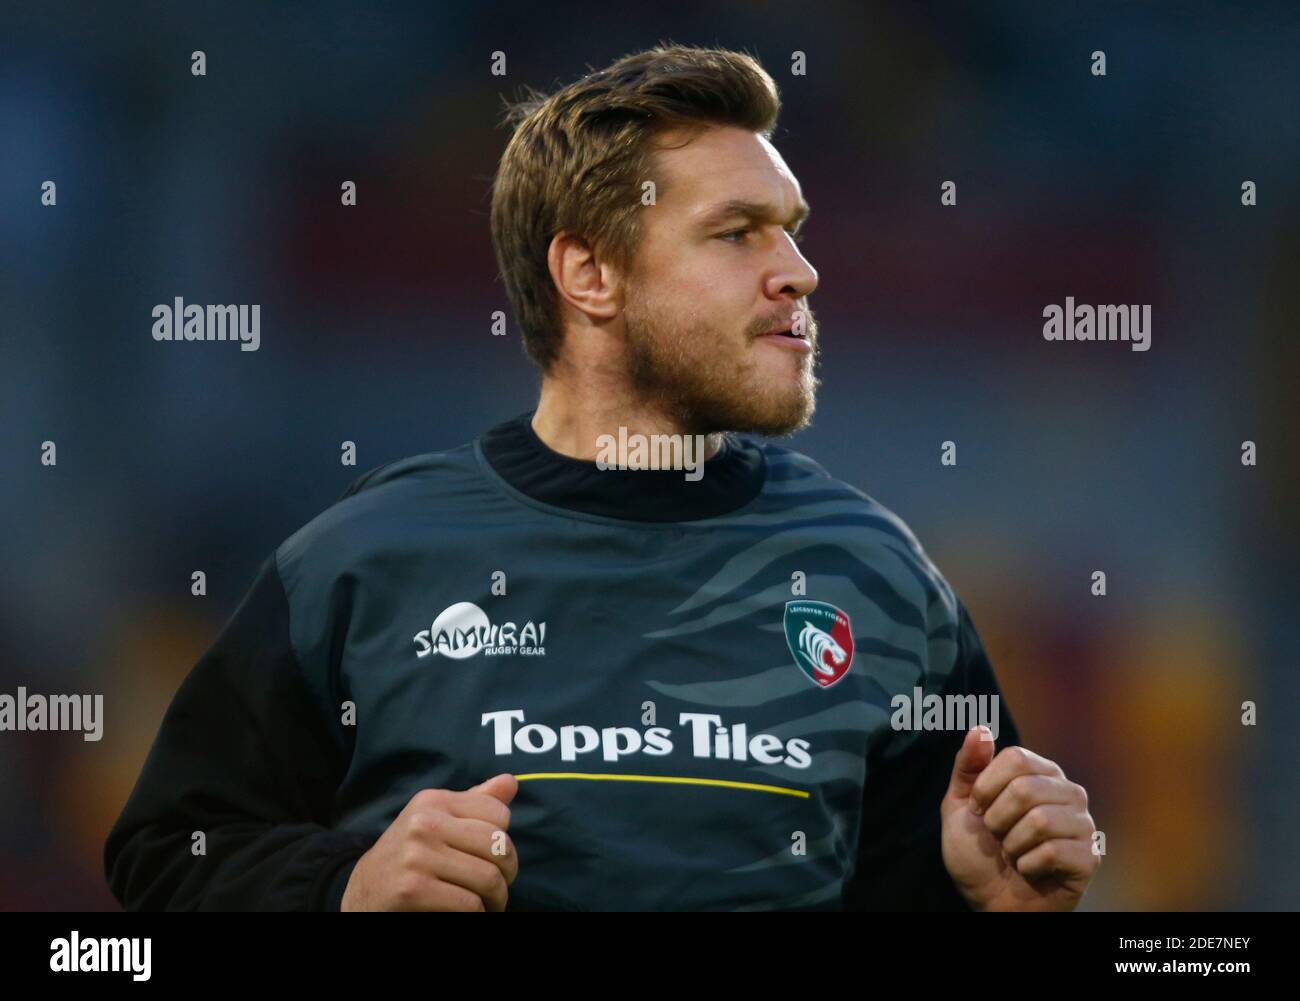 BRENTFORD, ENGLAND - NOVEMBER 29: Dan Kelly of Leicester Tigers during Gallagher Premiership between London Irish and Leicester Tigers at Brentford Community Stadium, Brentford, UK on 29th November 2020 Credit: Action Foto Sport/Alamy Live News Stock Photo